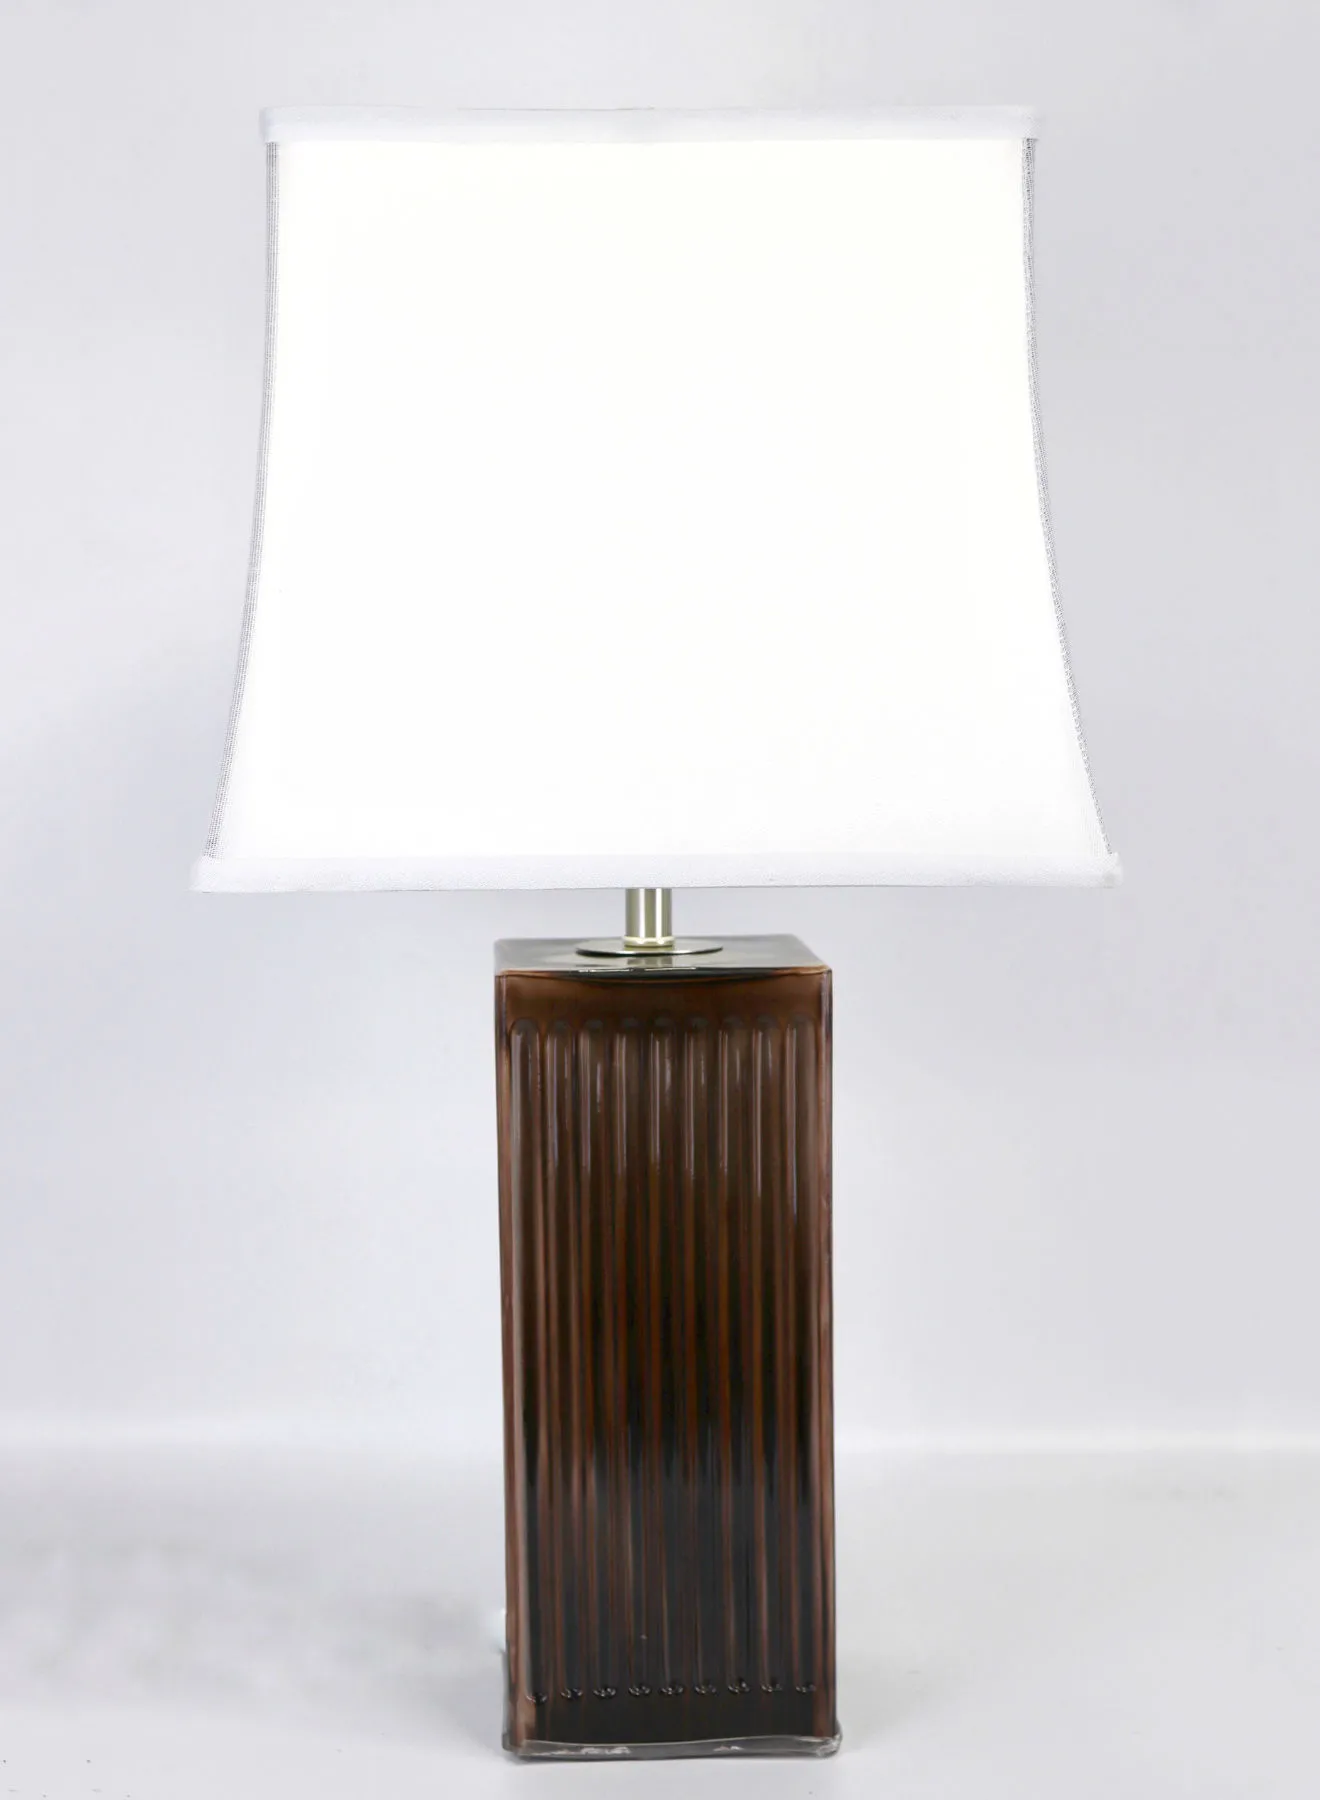 ebb & flow Modern Design Glass Table Lamp Unique Luxury Quality Material for the Perfect Stylish Home RSN71010-C Brown 13 x 24